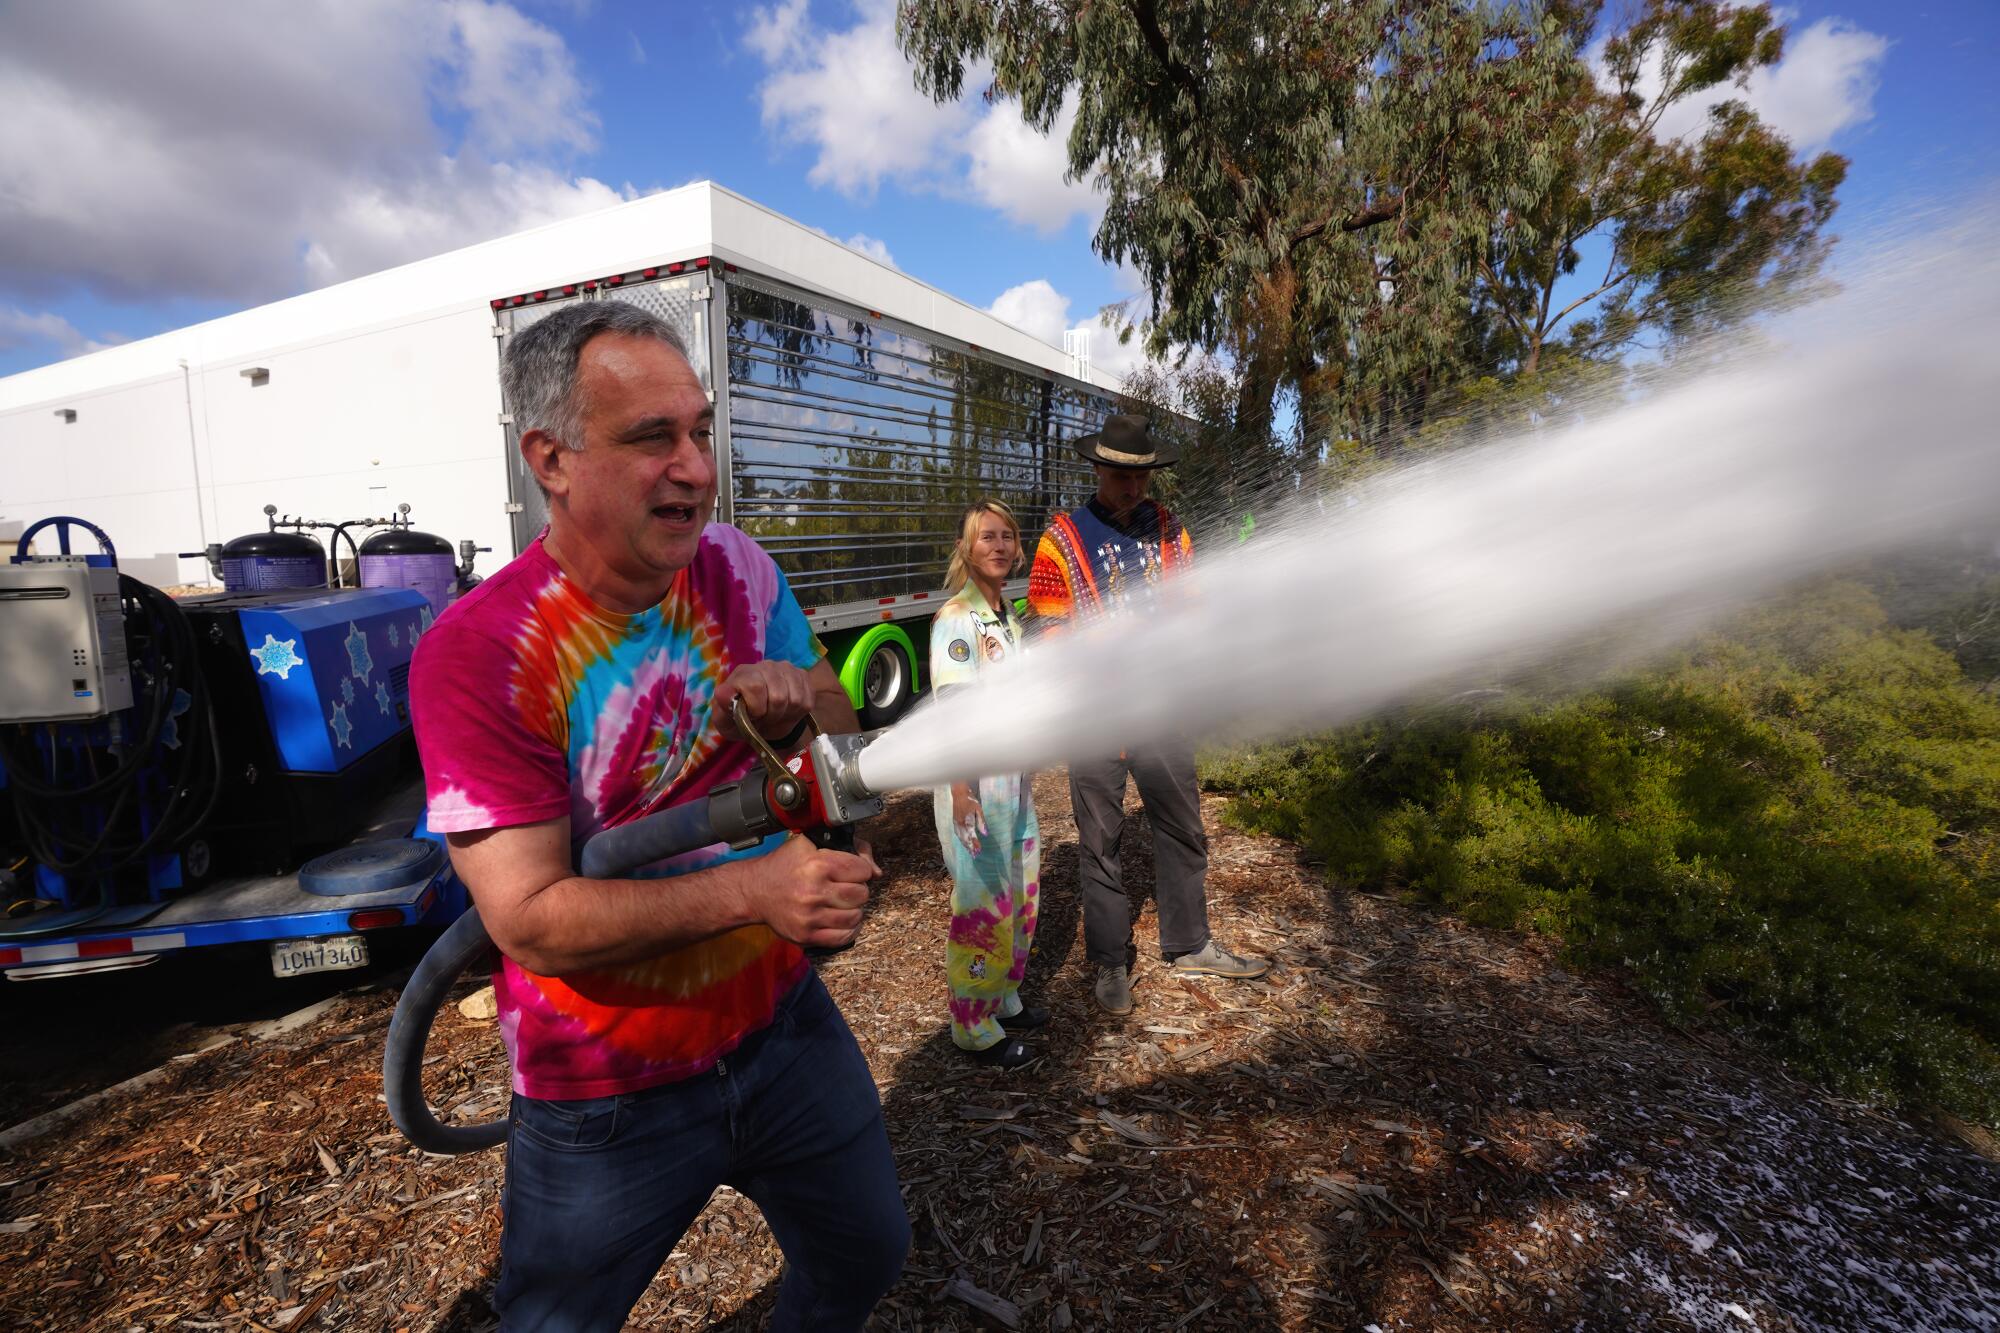 A man spraying white foam from a hose outside a building as others watch